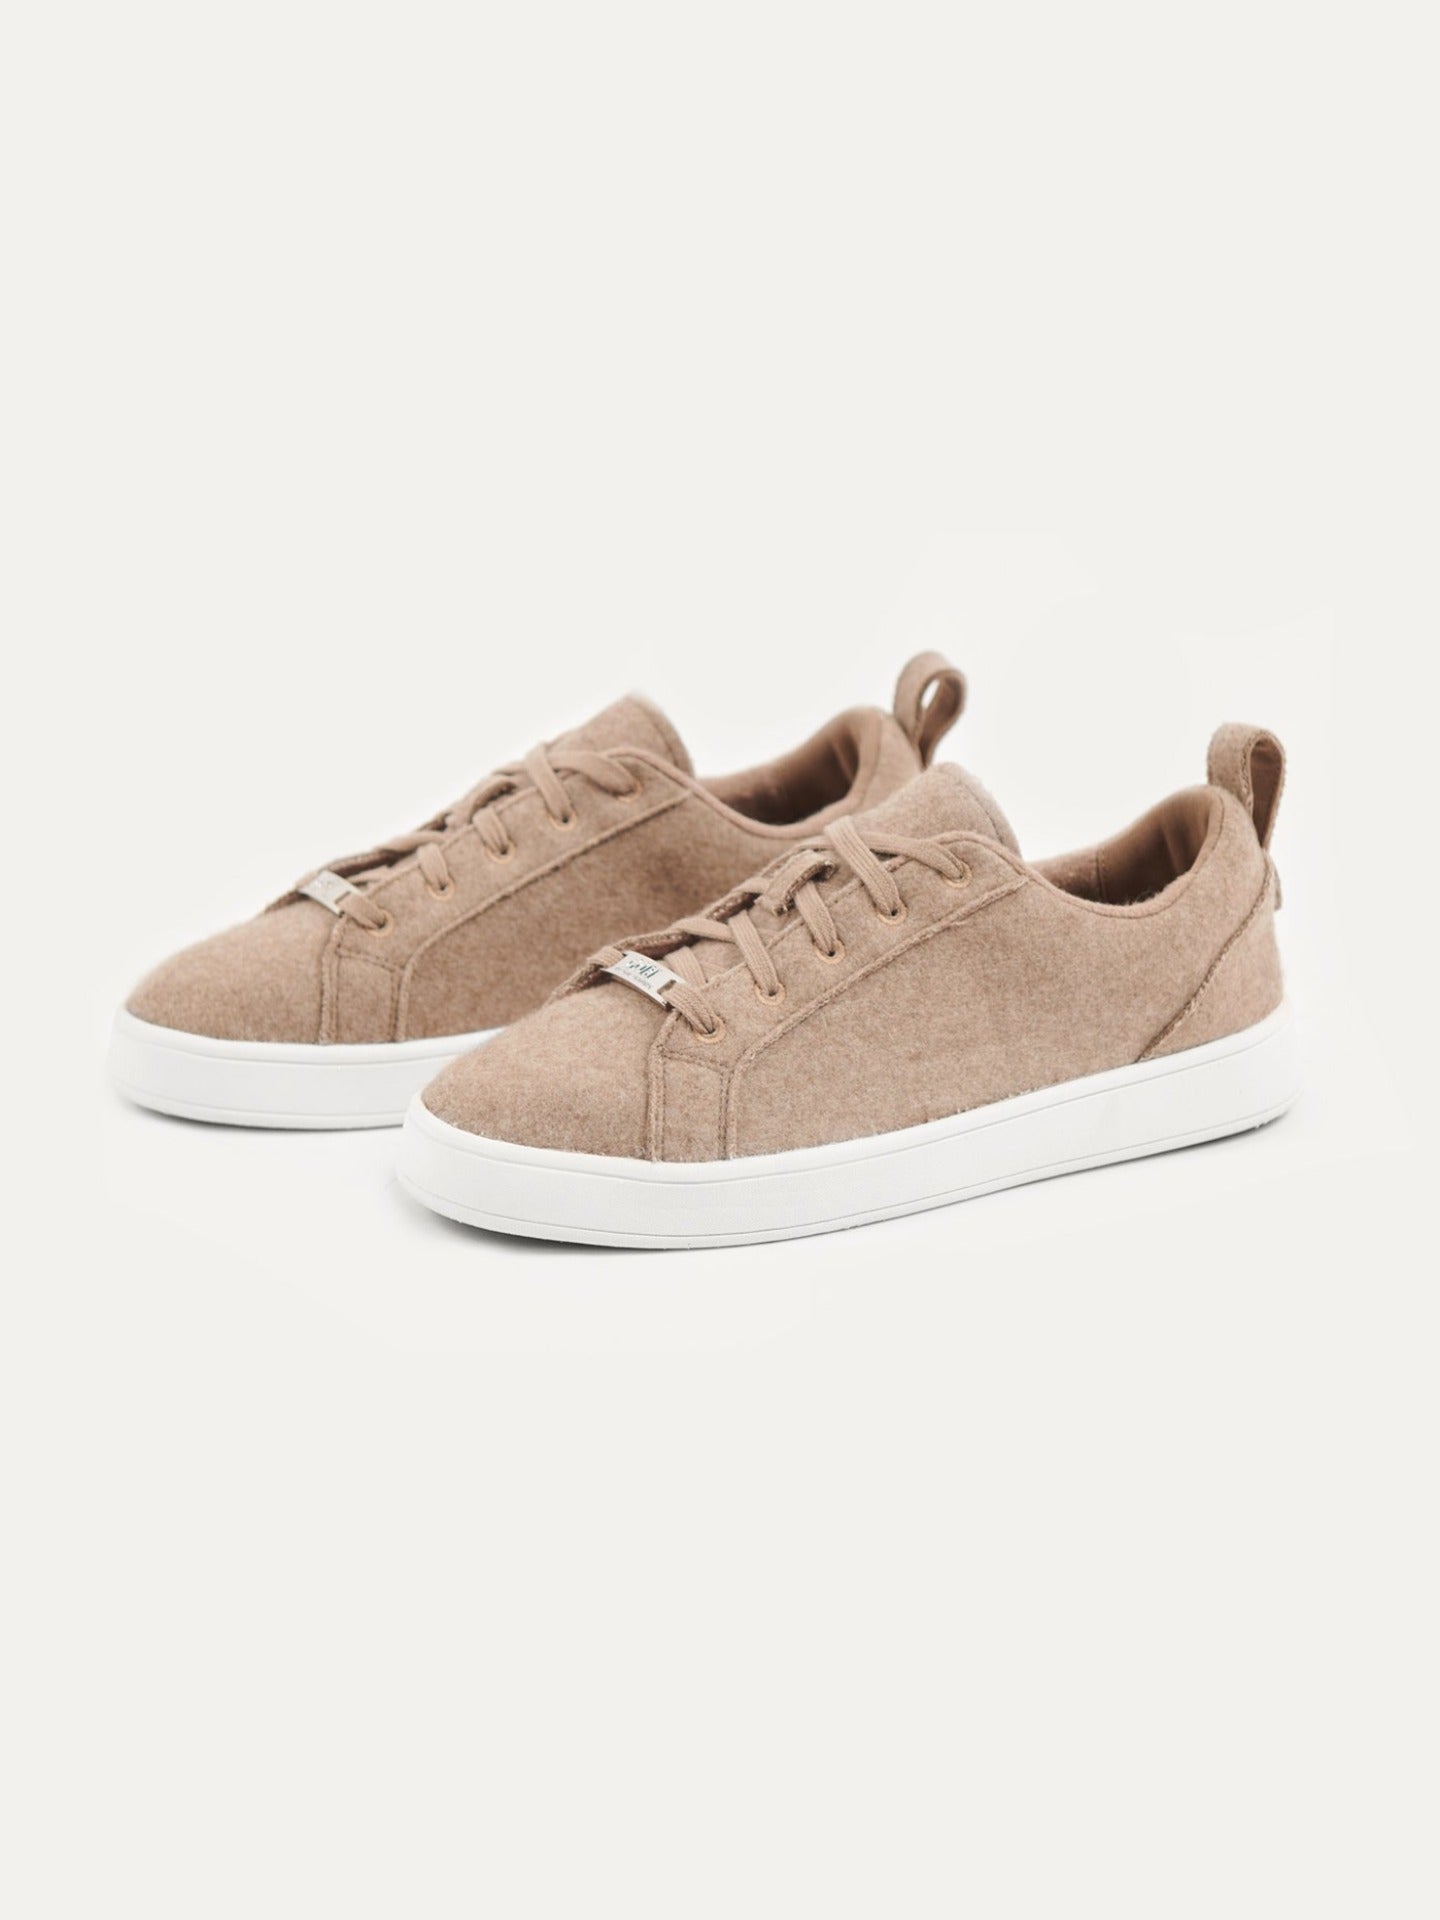 Unisex Cashmere Low Ankle Sneakers Taupe - Gobi Cashmere